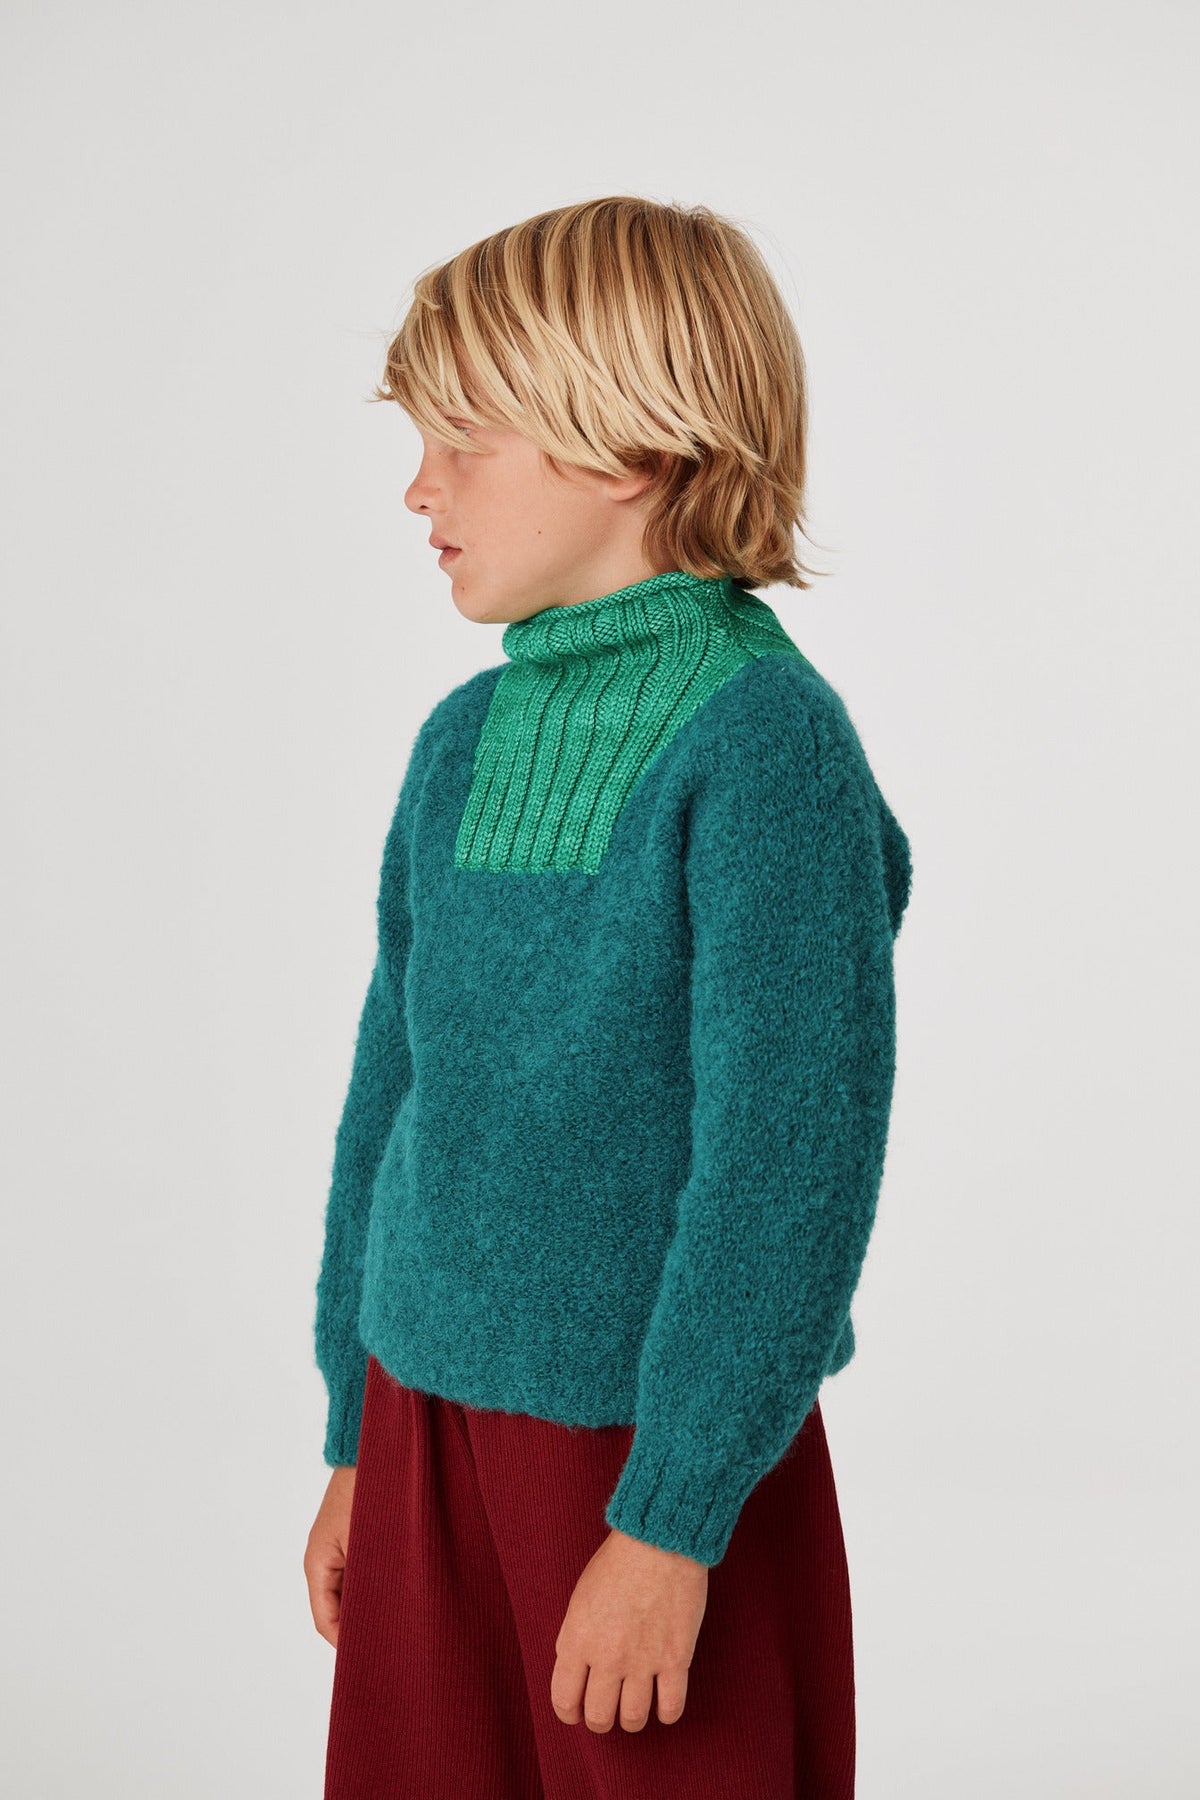 Boucle Ski Sweater - Peacock+Model is 48 inches tall, 48lbs, wearing a size 6-7y